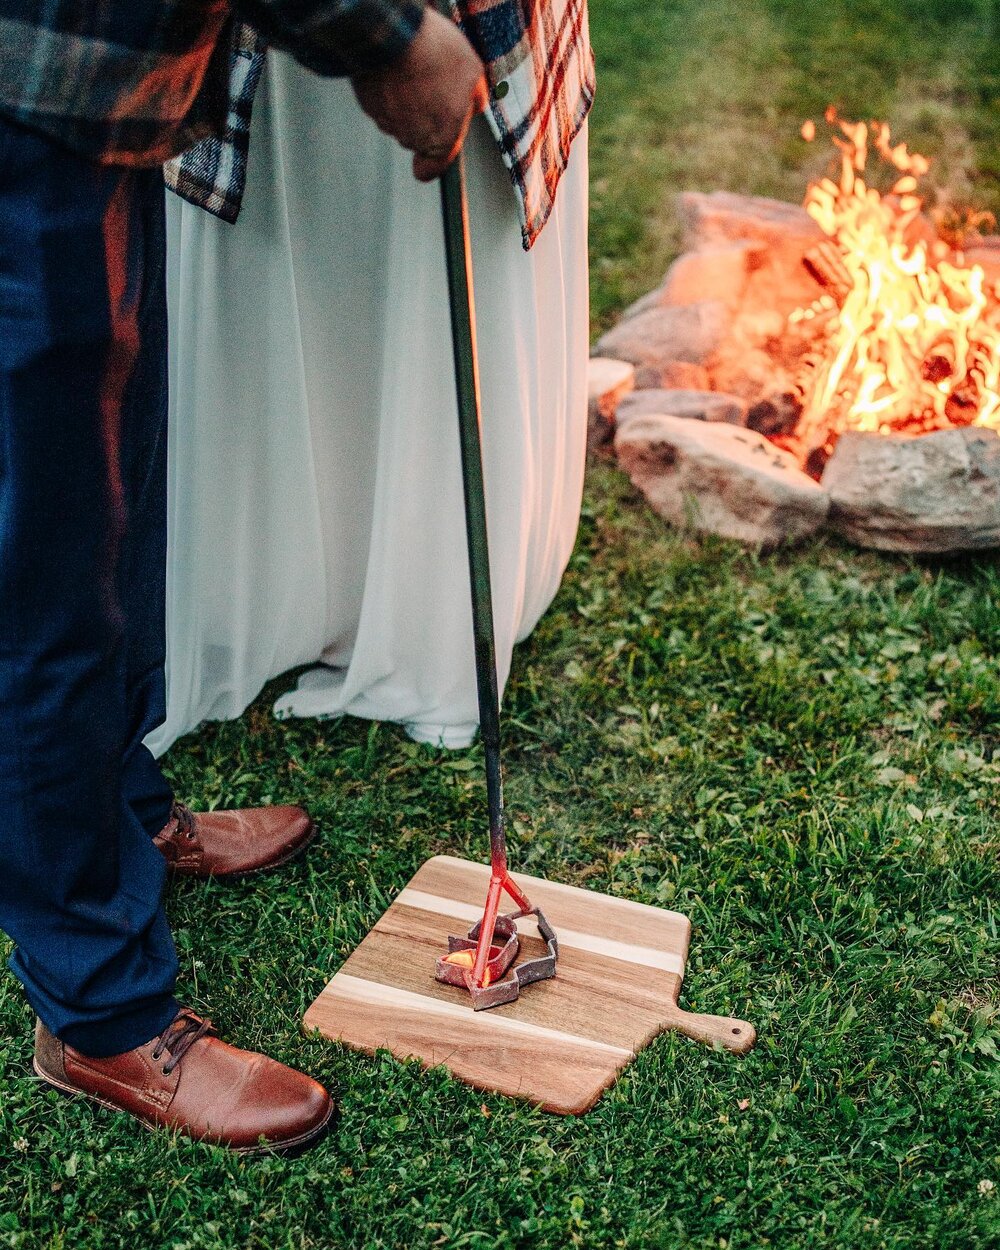 Jennifer &amp; Chad&rsquo;s beautiful elopement day began with getting married just outside Glacier National Park followed by ending the night at their Airbnb. They grazed on a charcuterie board by a camp fire and branded a piece of wood to commemora